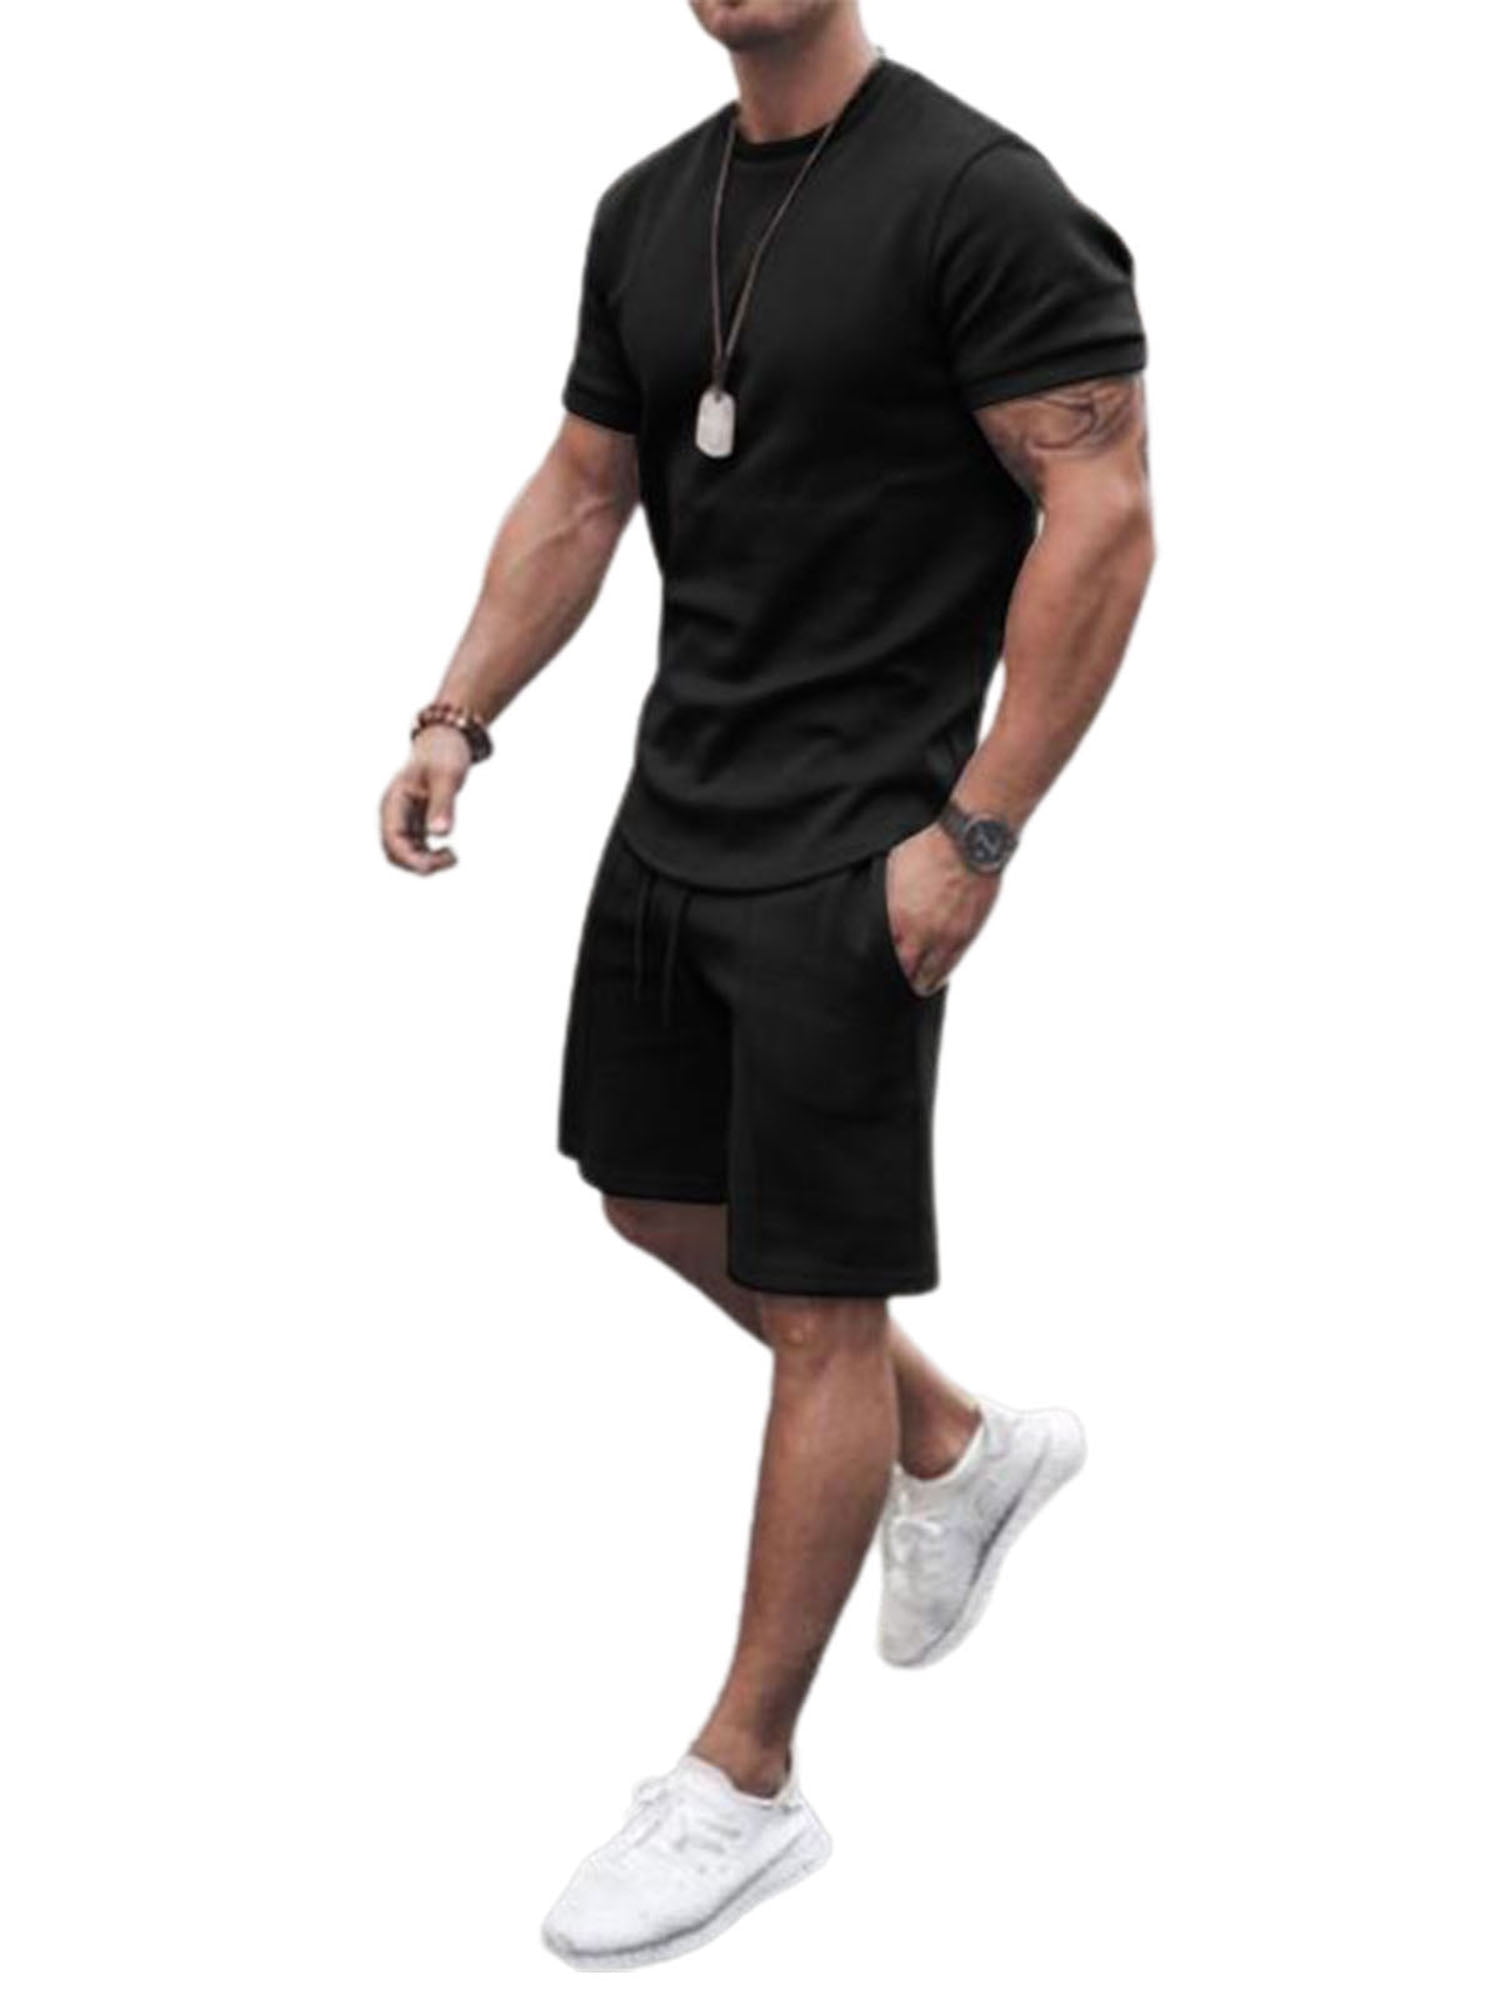 Men Summer Sports Suit Outfits 2 Piece Tracksuit Short Sleeve T Shirts and Shorts Stylish Casual Sweatsuit Set